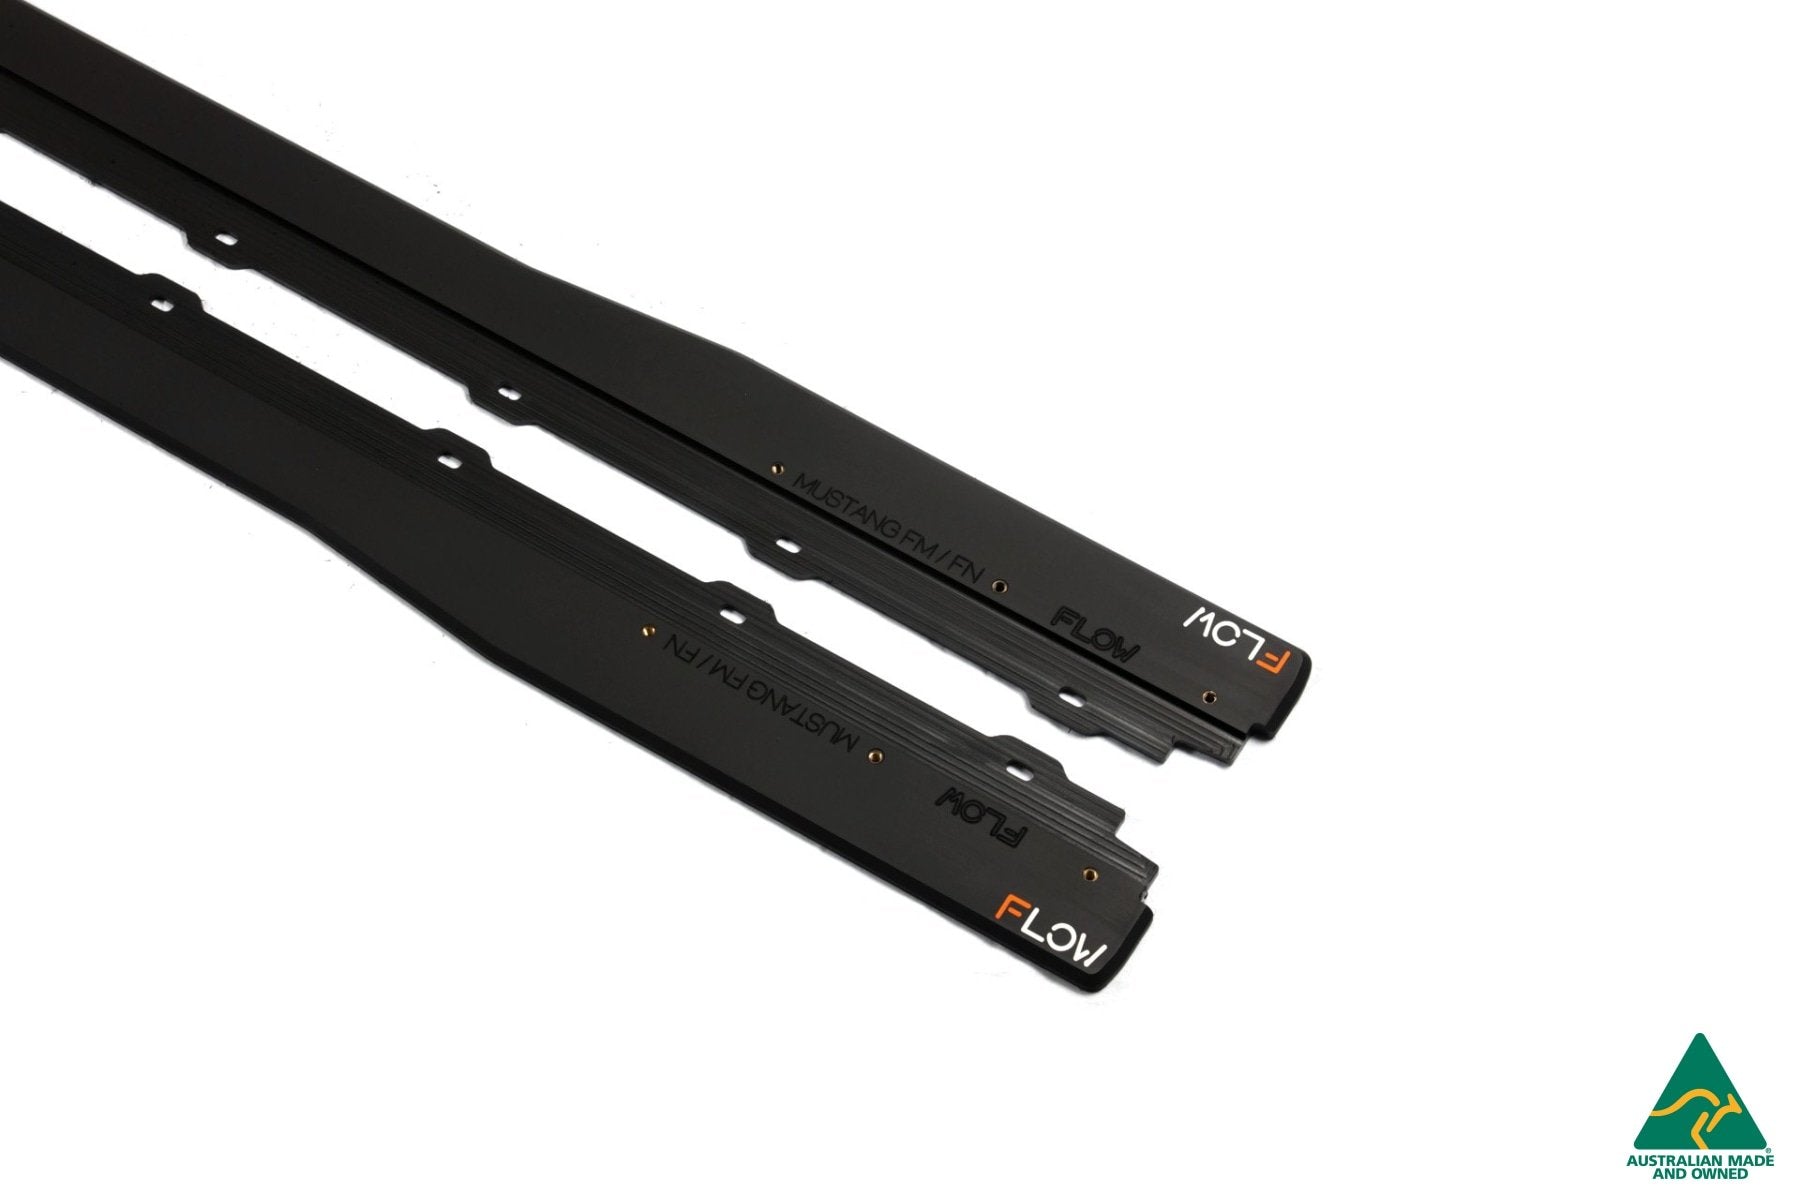 GT Mustang S550 FN Side Skirt Splitters (Pair) - MODE Auto Concepts